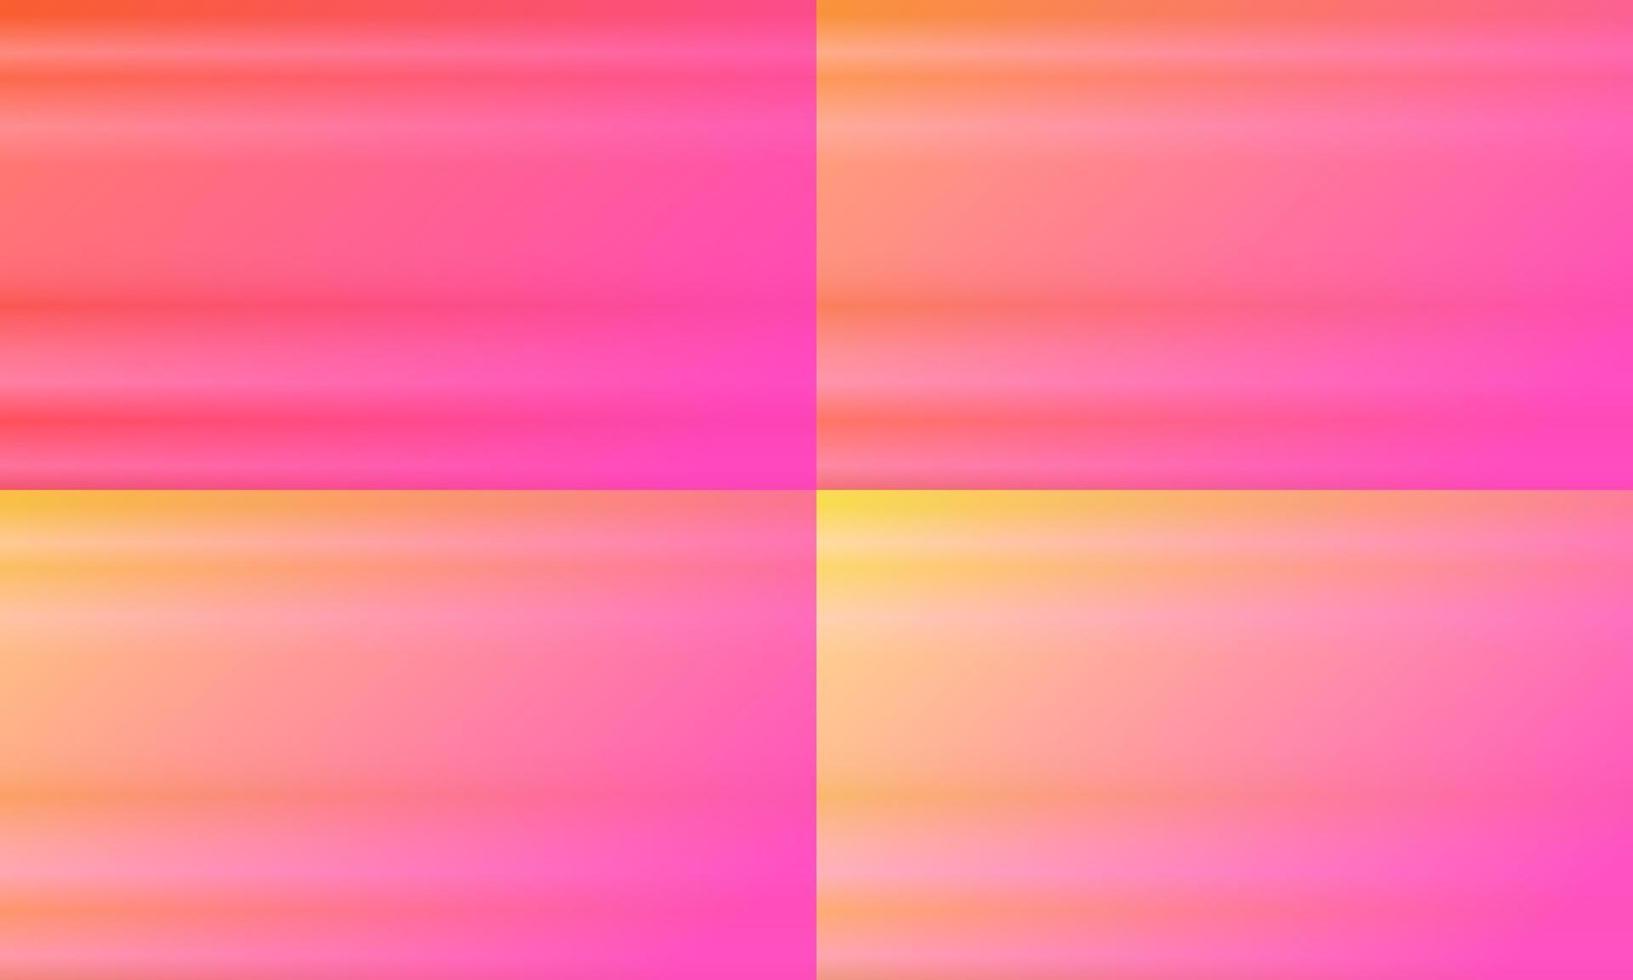 four sets of pink horizontal gradient abstract background. shiny, blur, modern and colorful style. orange, yellow, and gold. great for backdrop, homepage, wallpaper, cover, poster, banner or flyer vector